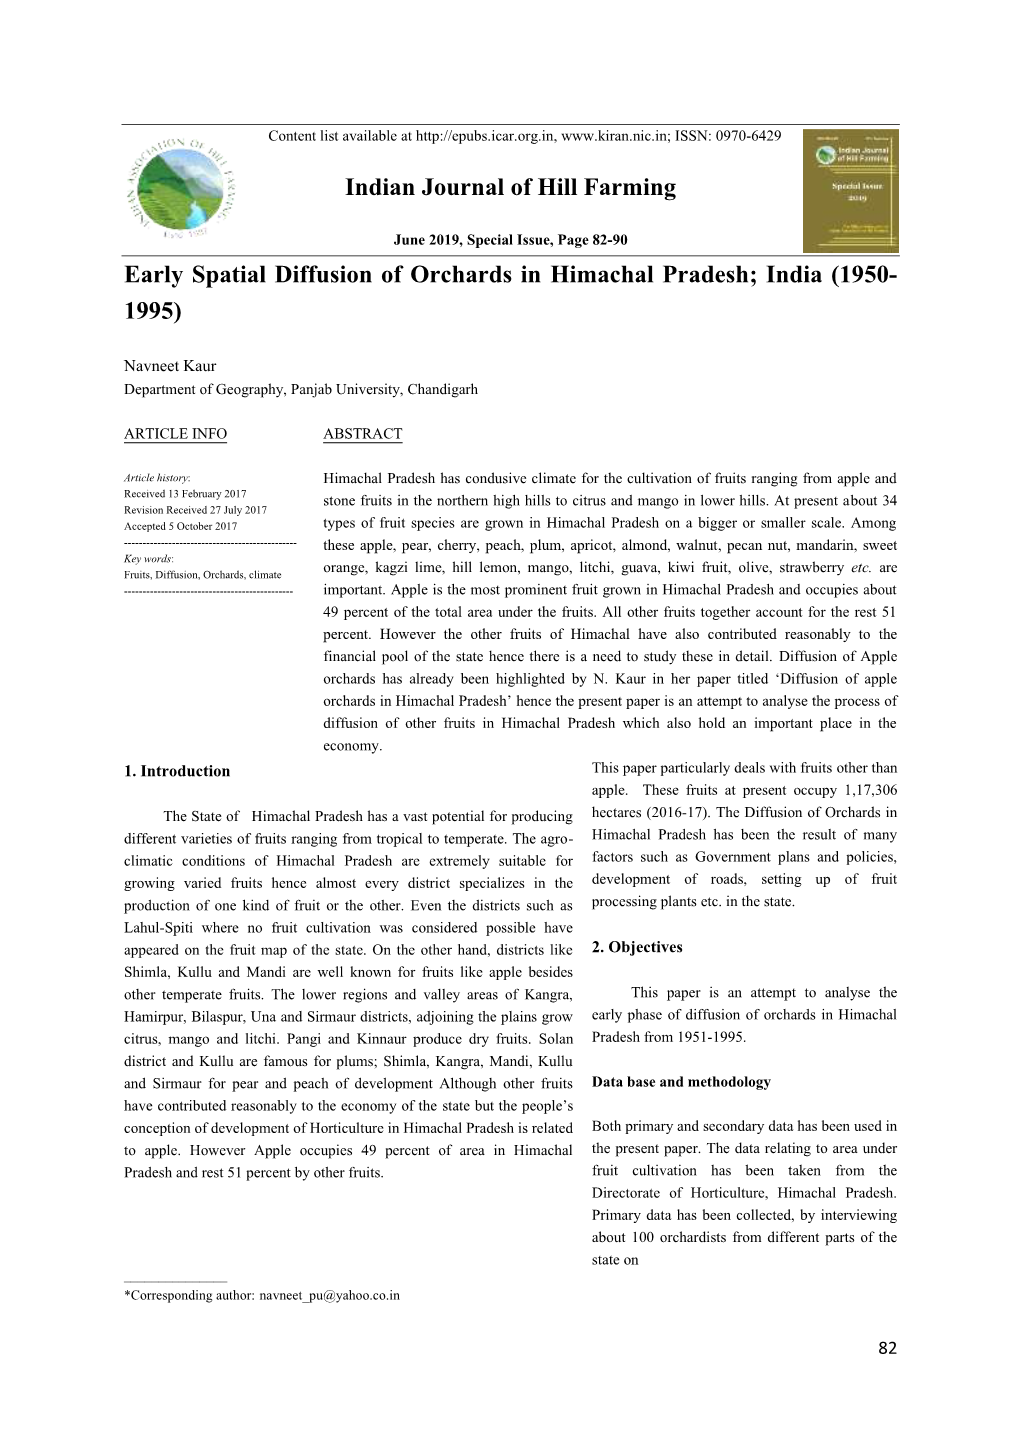 Early Spatial Diffusion of Orchards in Himachal Pradesh; India (1950- 1995)